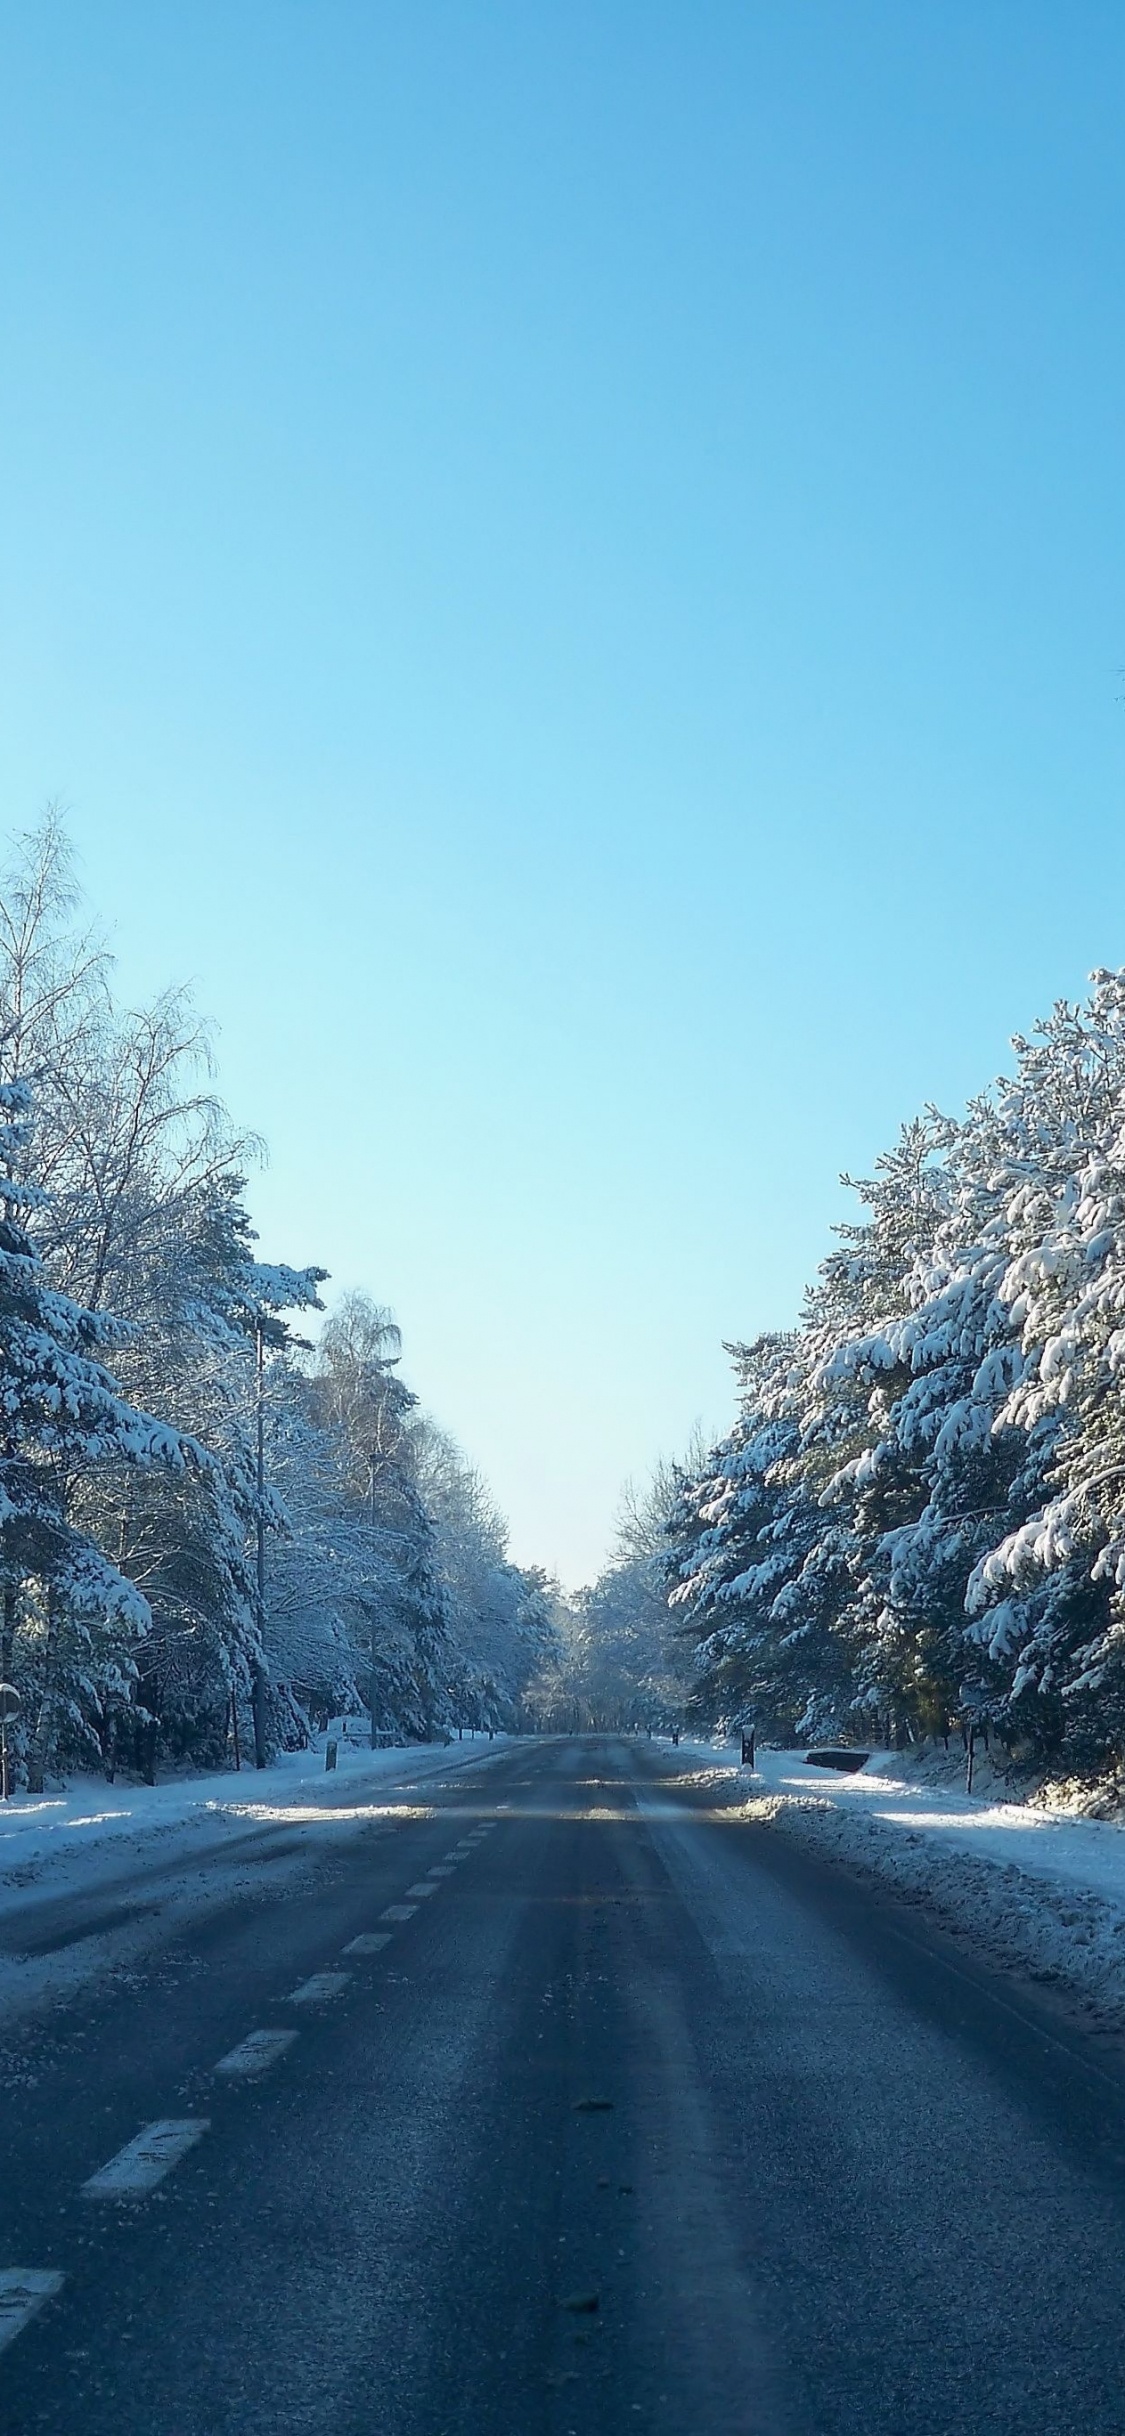 Snow Covered Road Between Trees During Daytime. Wallpaper in 1125x2436 Resolution